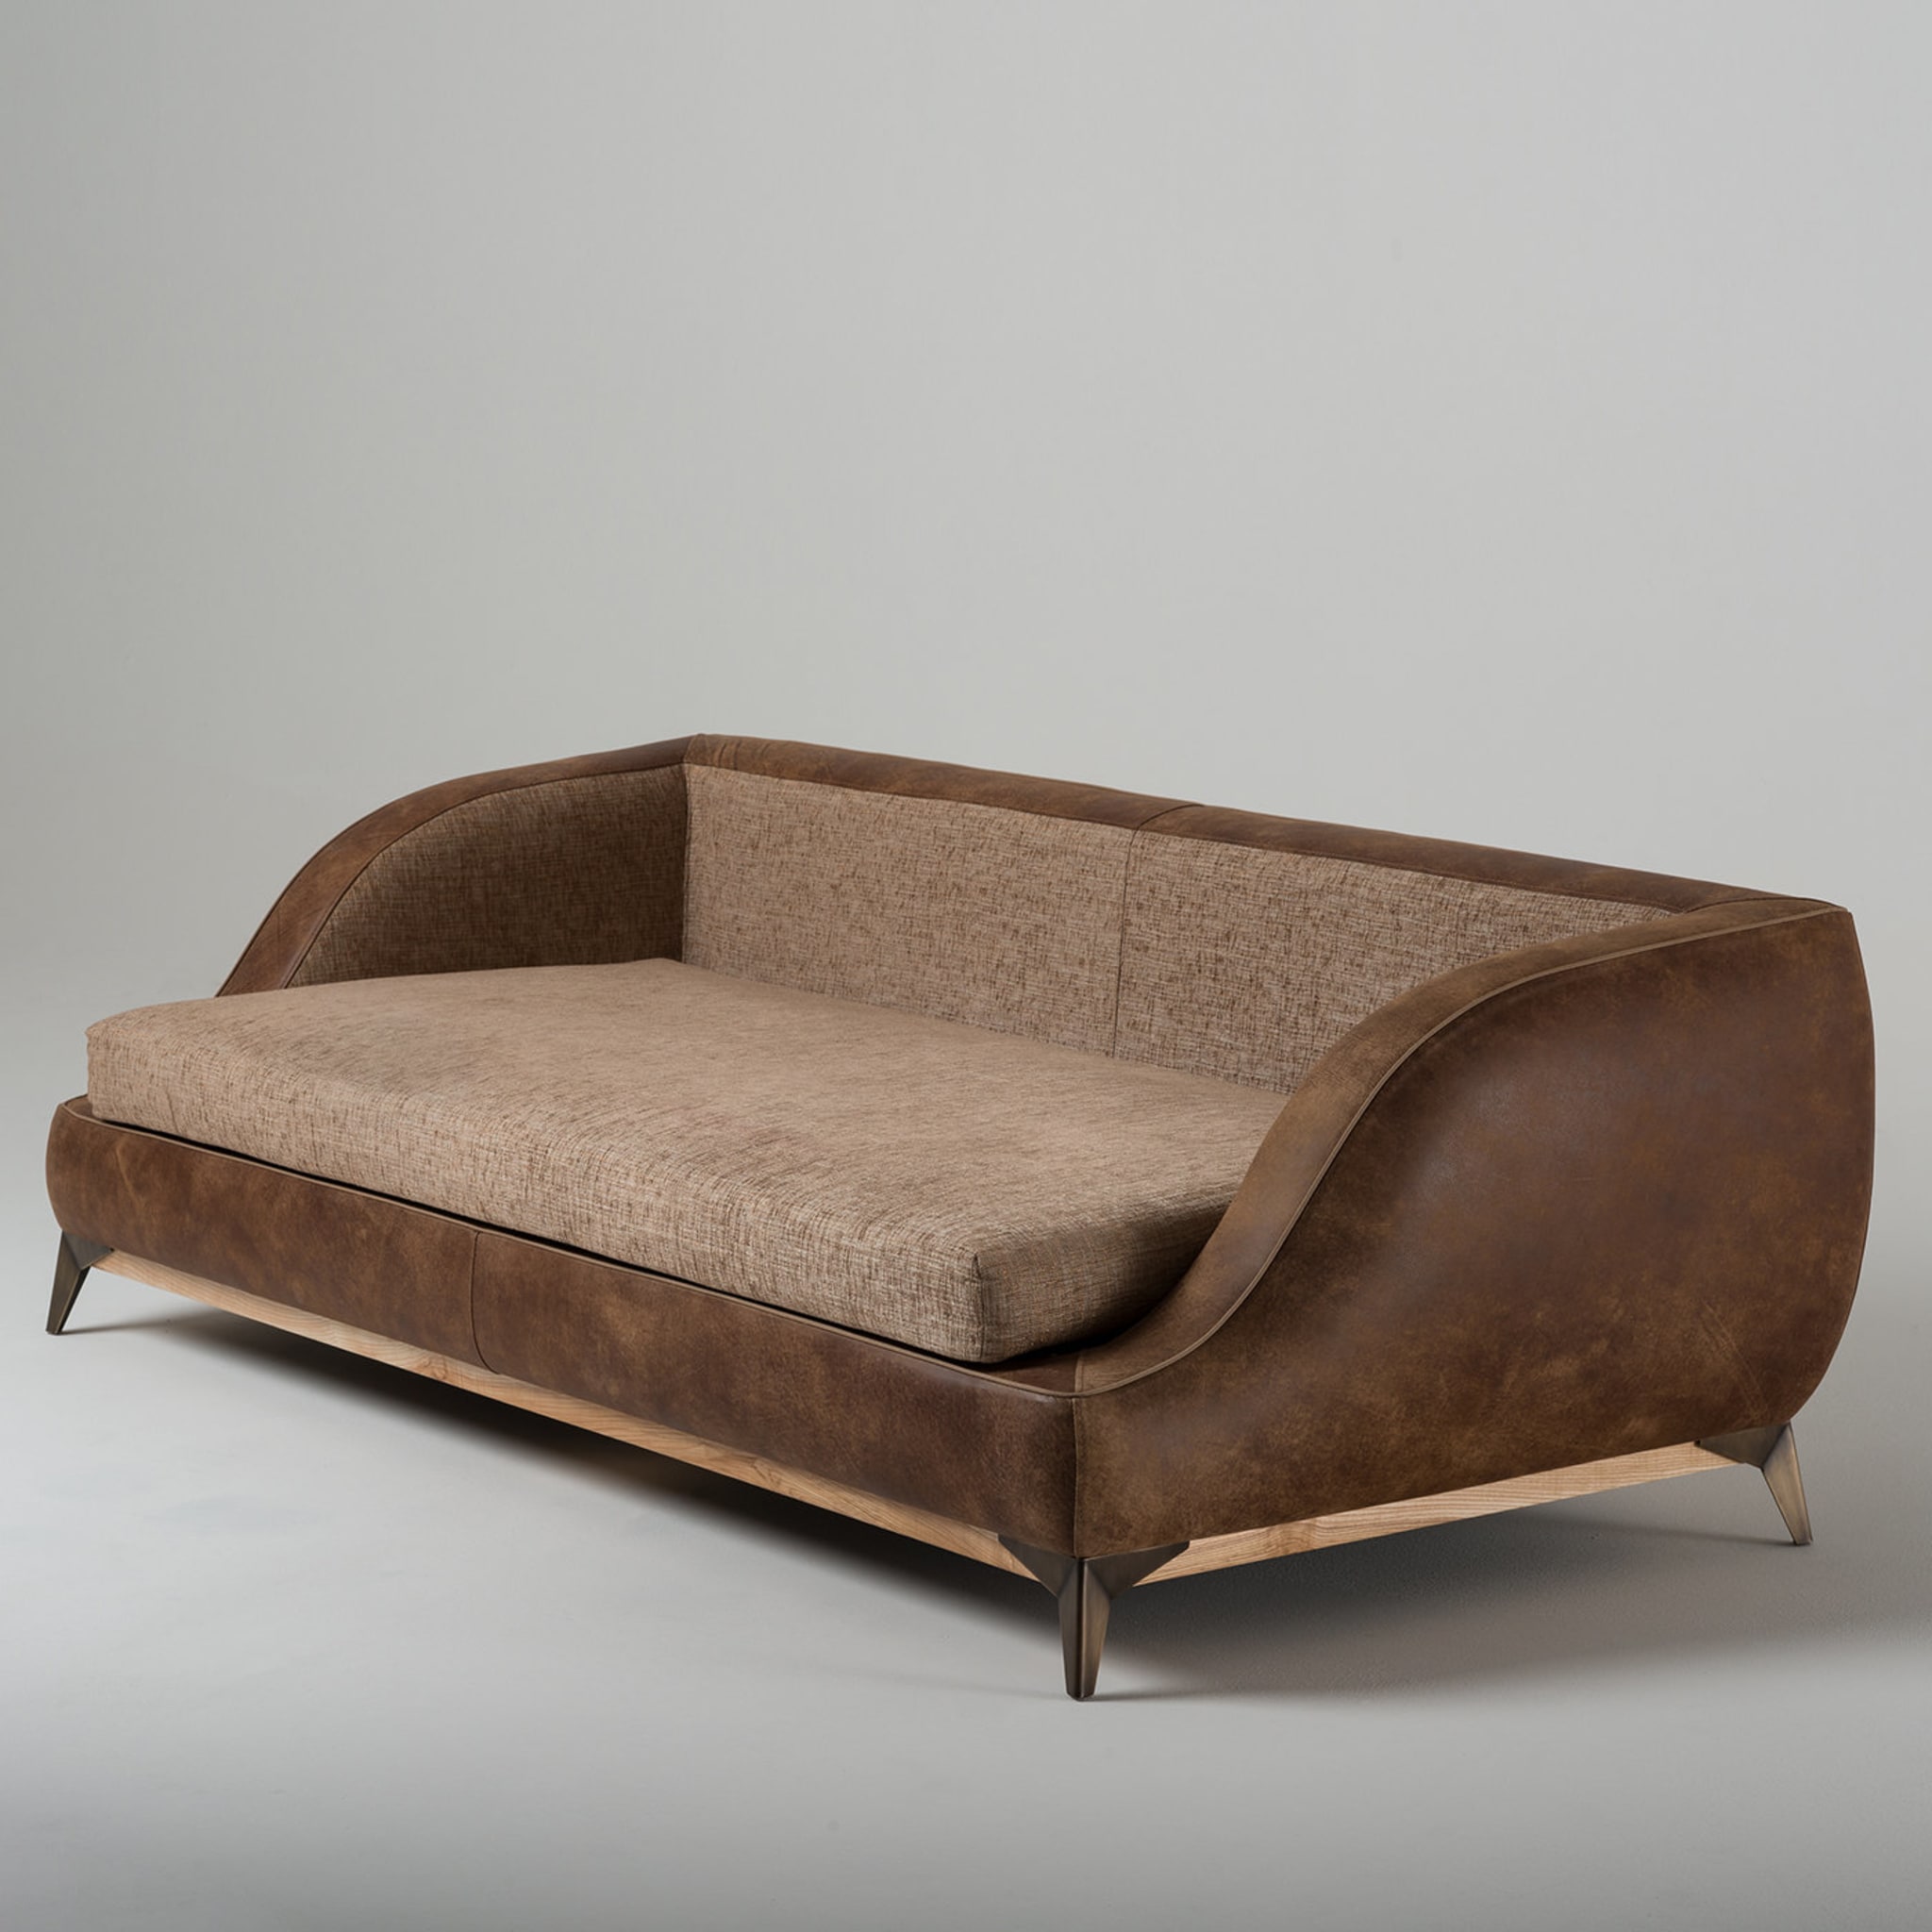 3-Seater Sofa in Leather & Fabric Combination - Alternative view 3